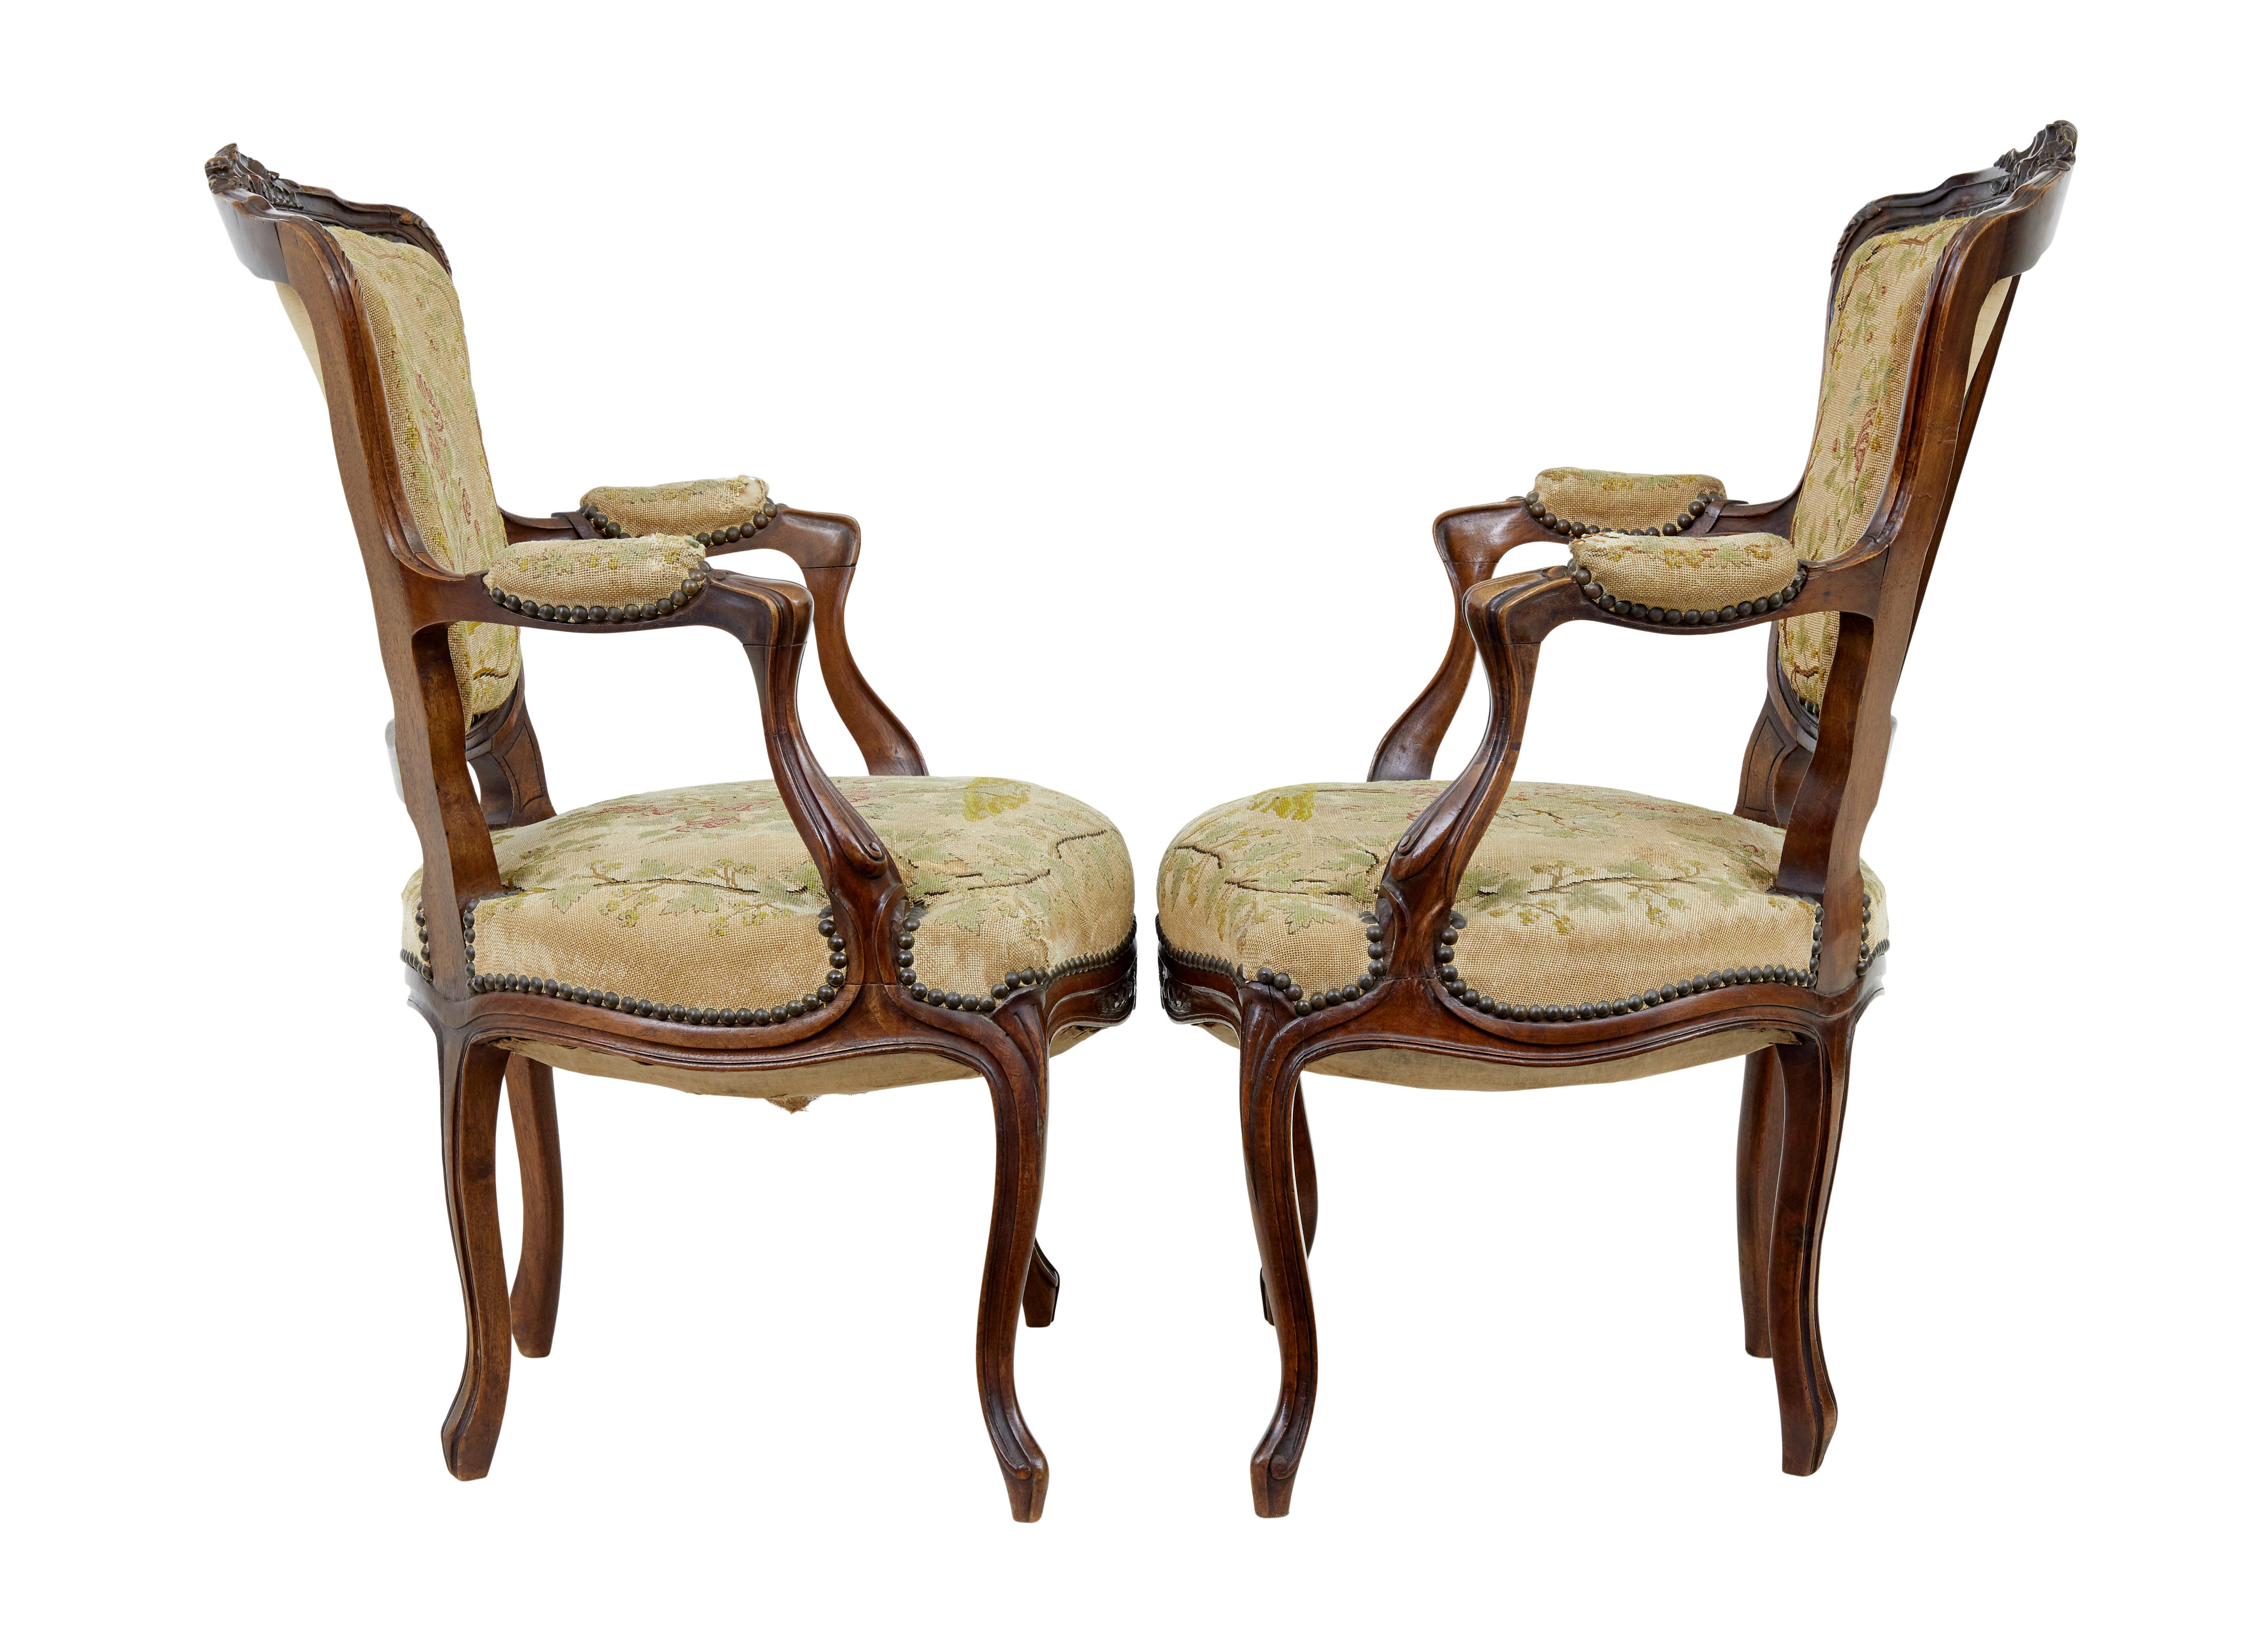 Victorian Pair of 19th century French fauteuil walnut armchairs For Sale